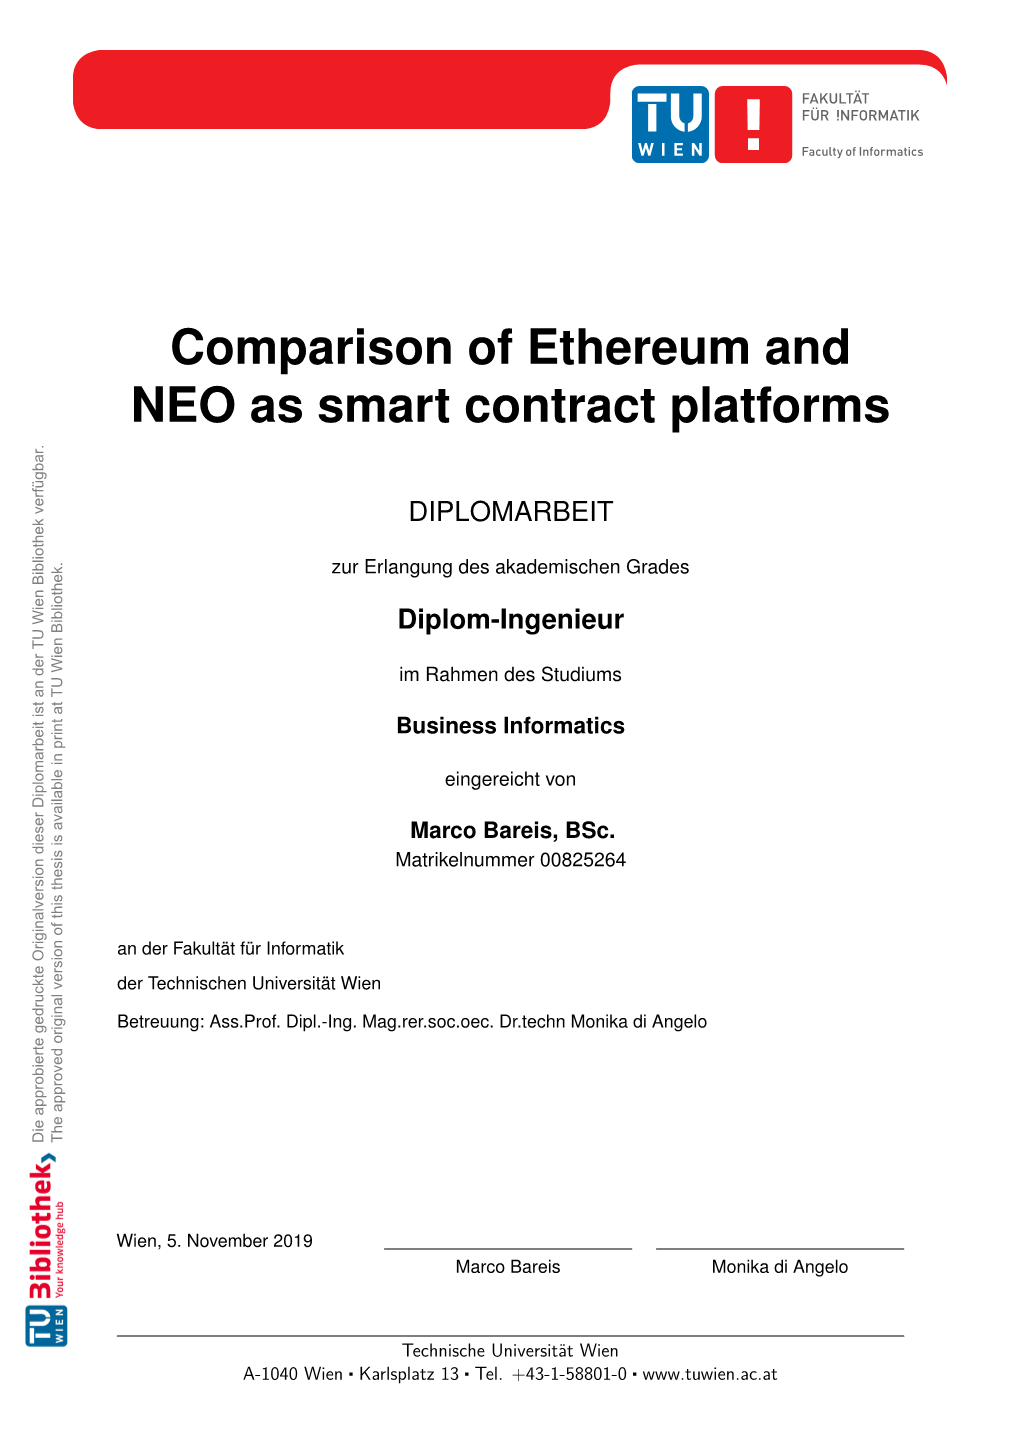 Comparison of Ethereum and NEO As Smart Contract Platforms